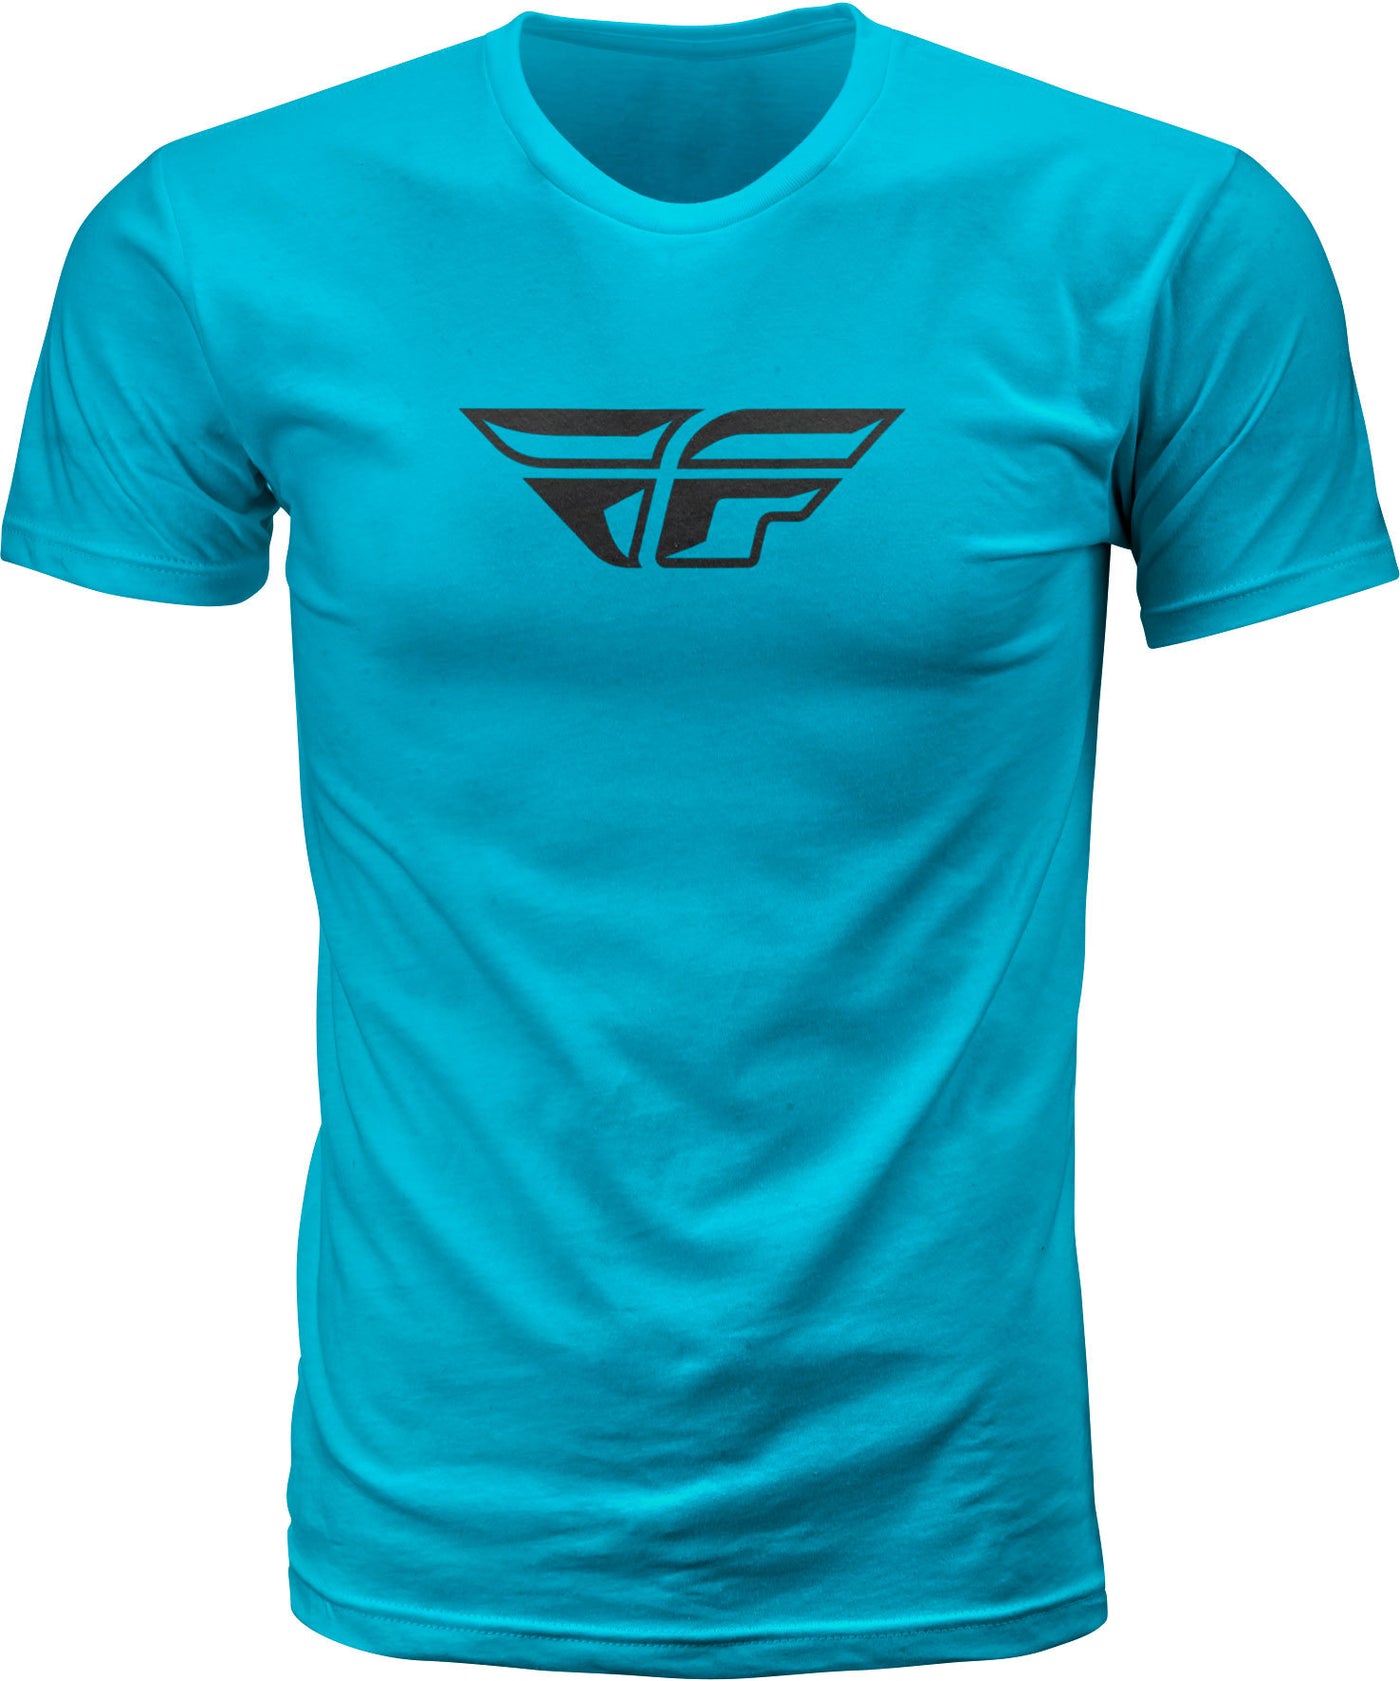 Fly F-wing Tee Turquoise Xl